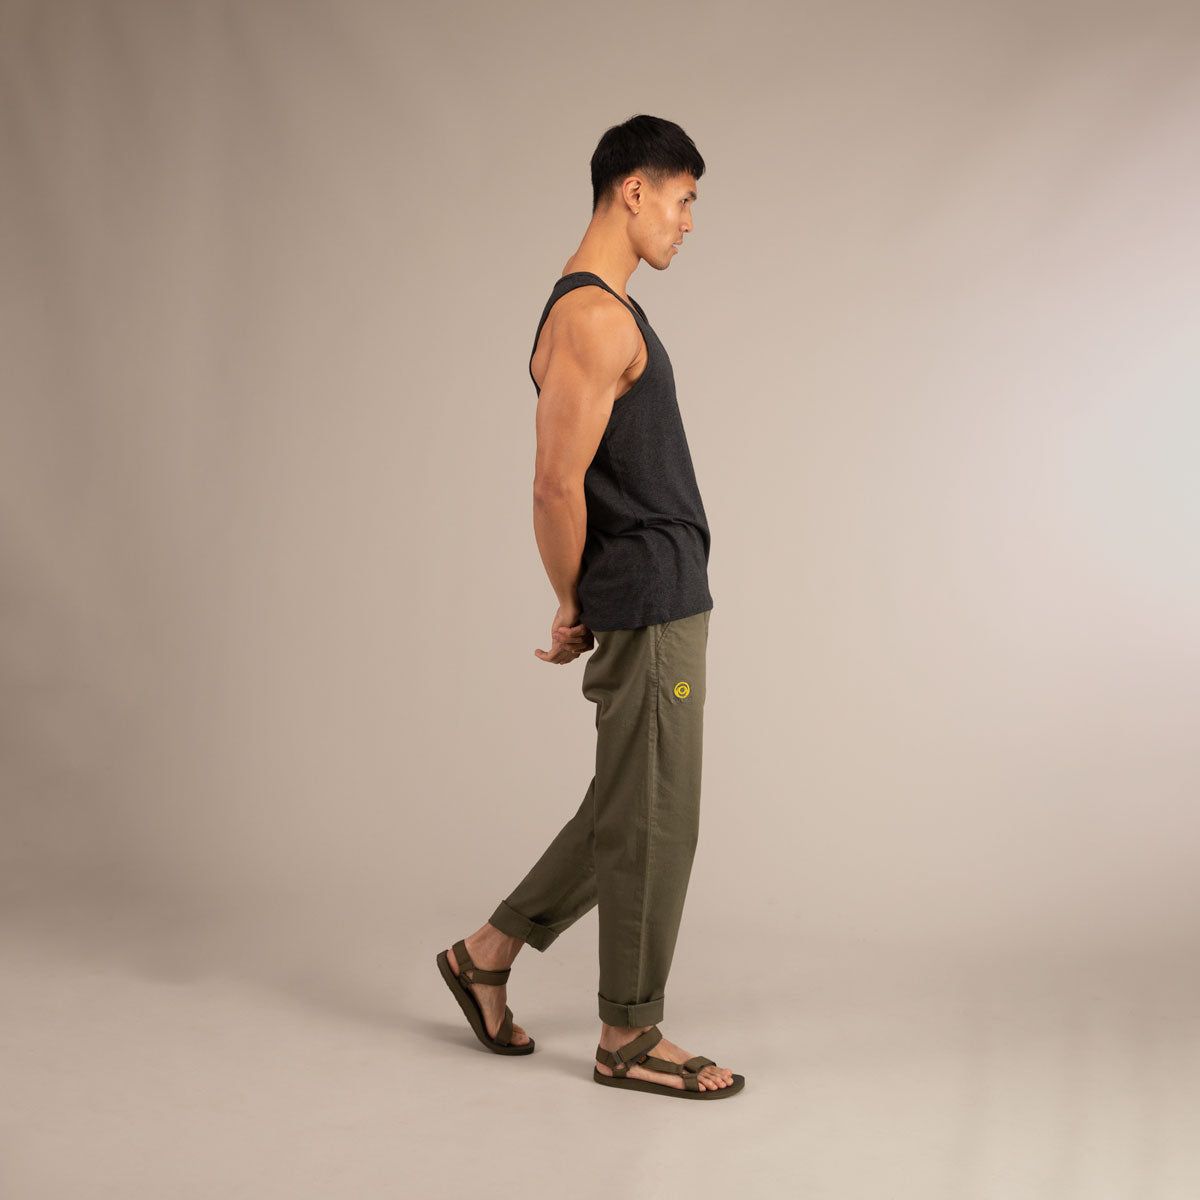 ROMAN LOGO VEST | Organic Cotton Action Vest | 3RD ROCK Clothing -  Donald is 6ft 1 with a 39" chest and wears a size M M